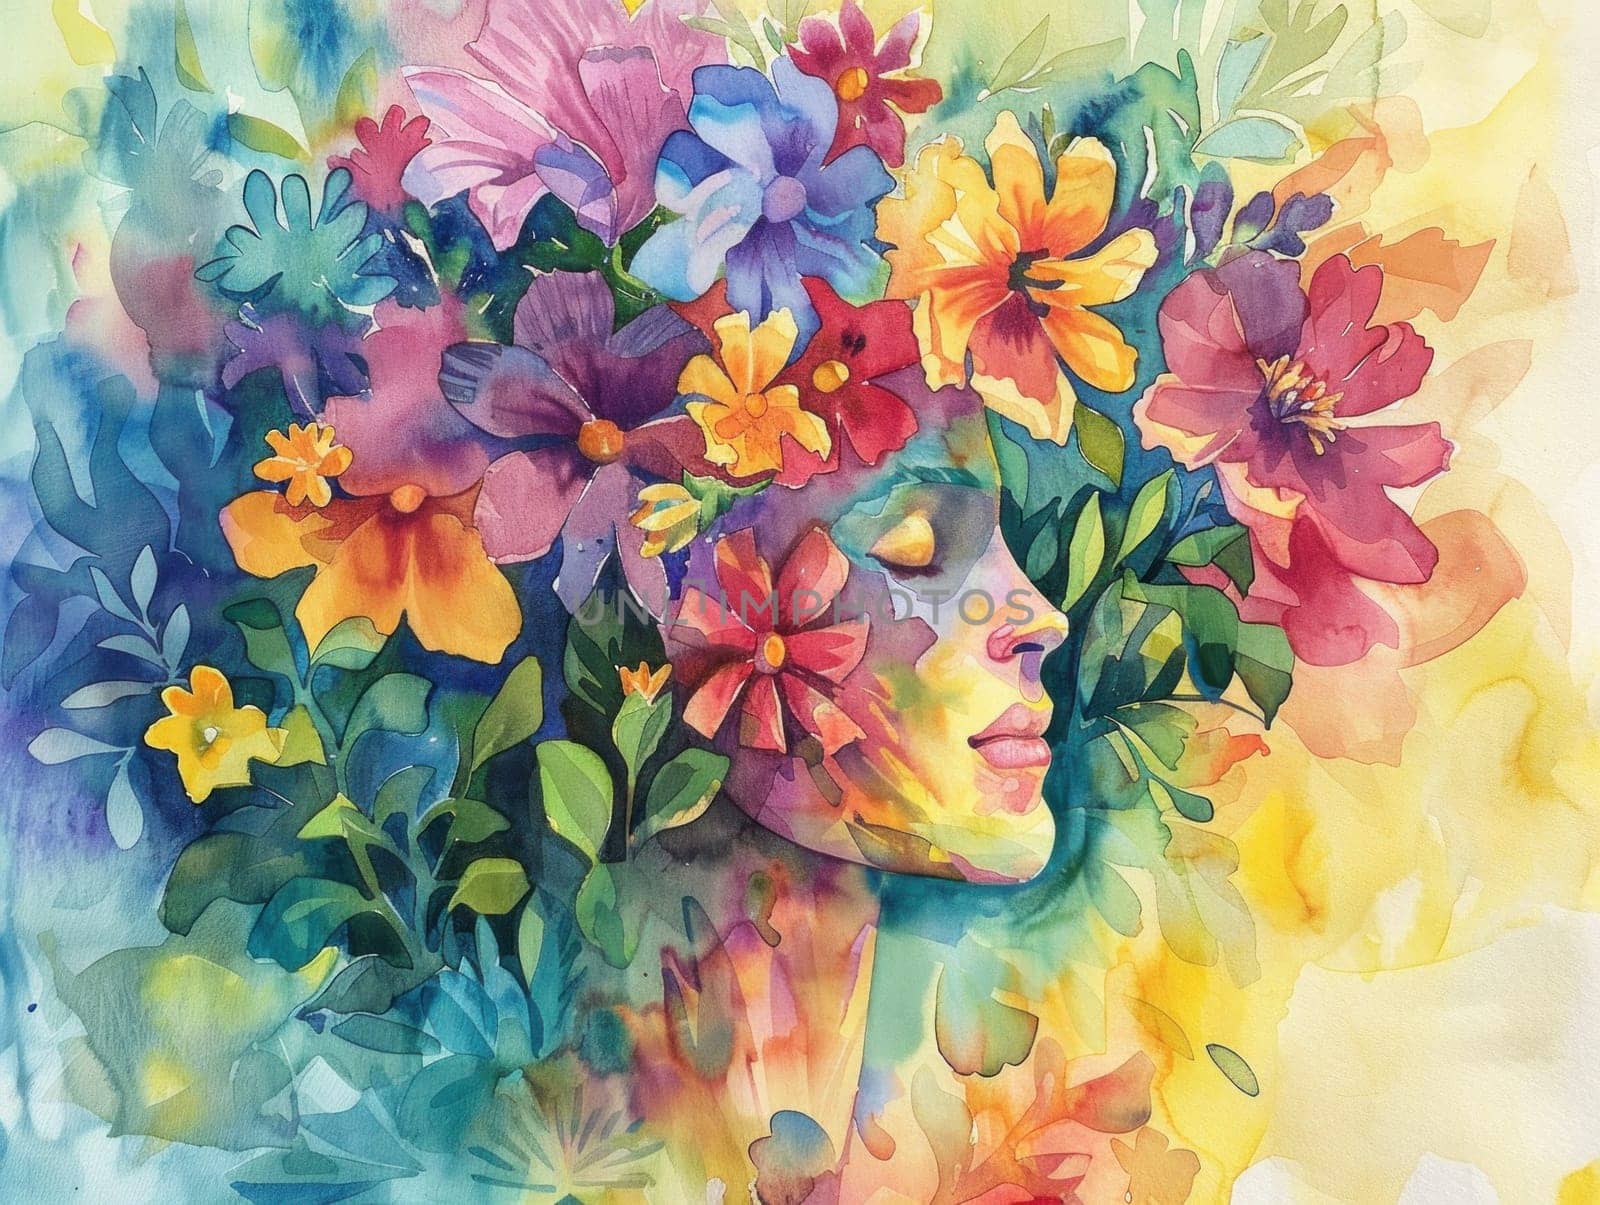 Watercolor painting of a woman adorned with flowers and floral decor, beauty and art theme